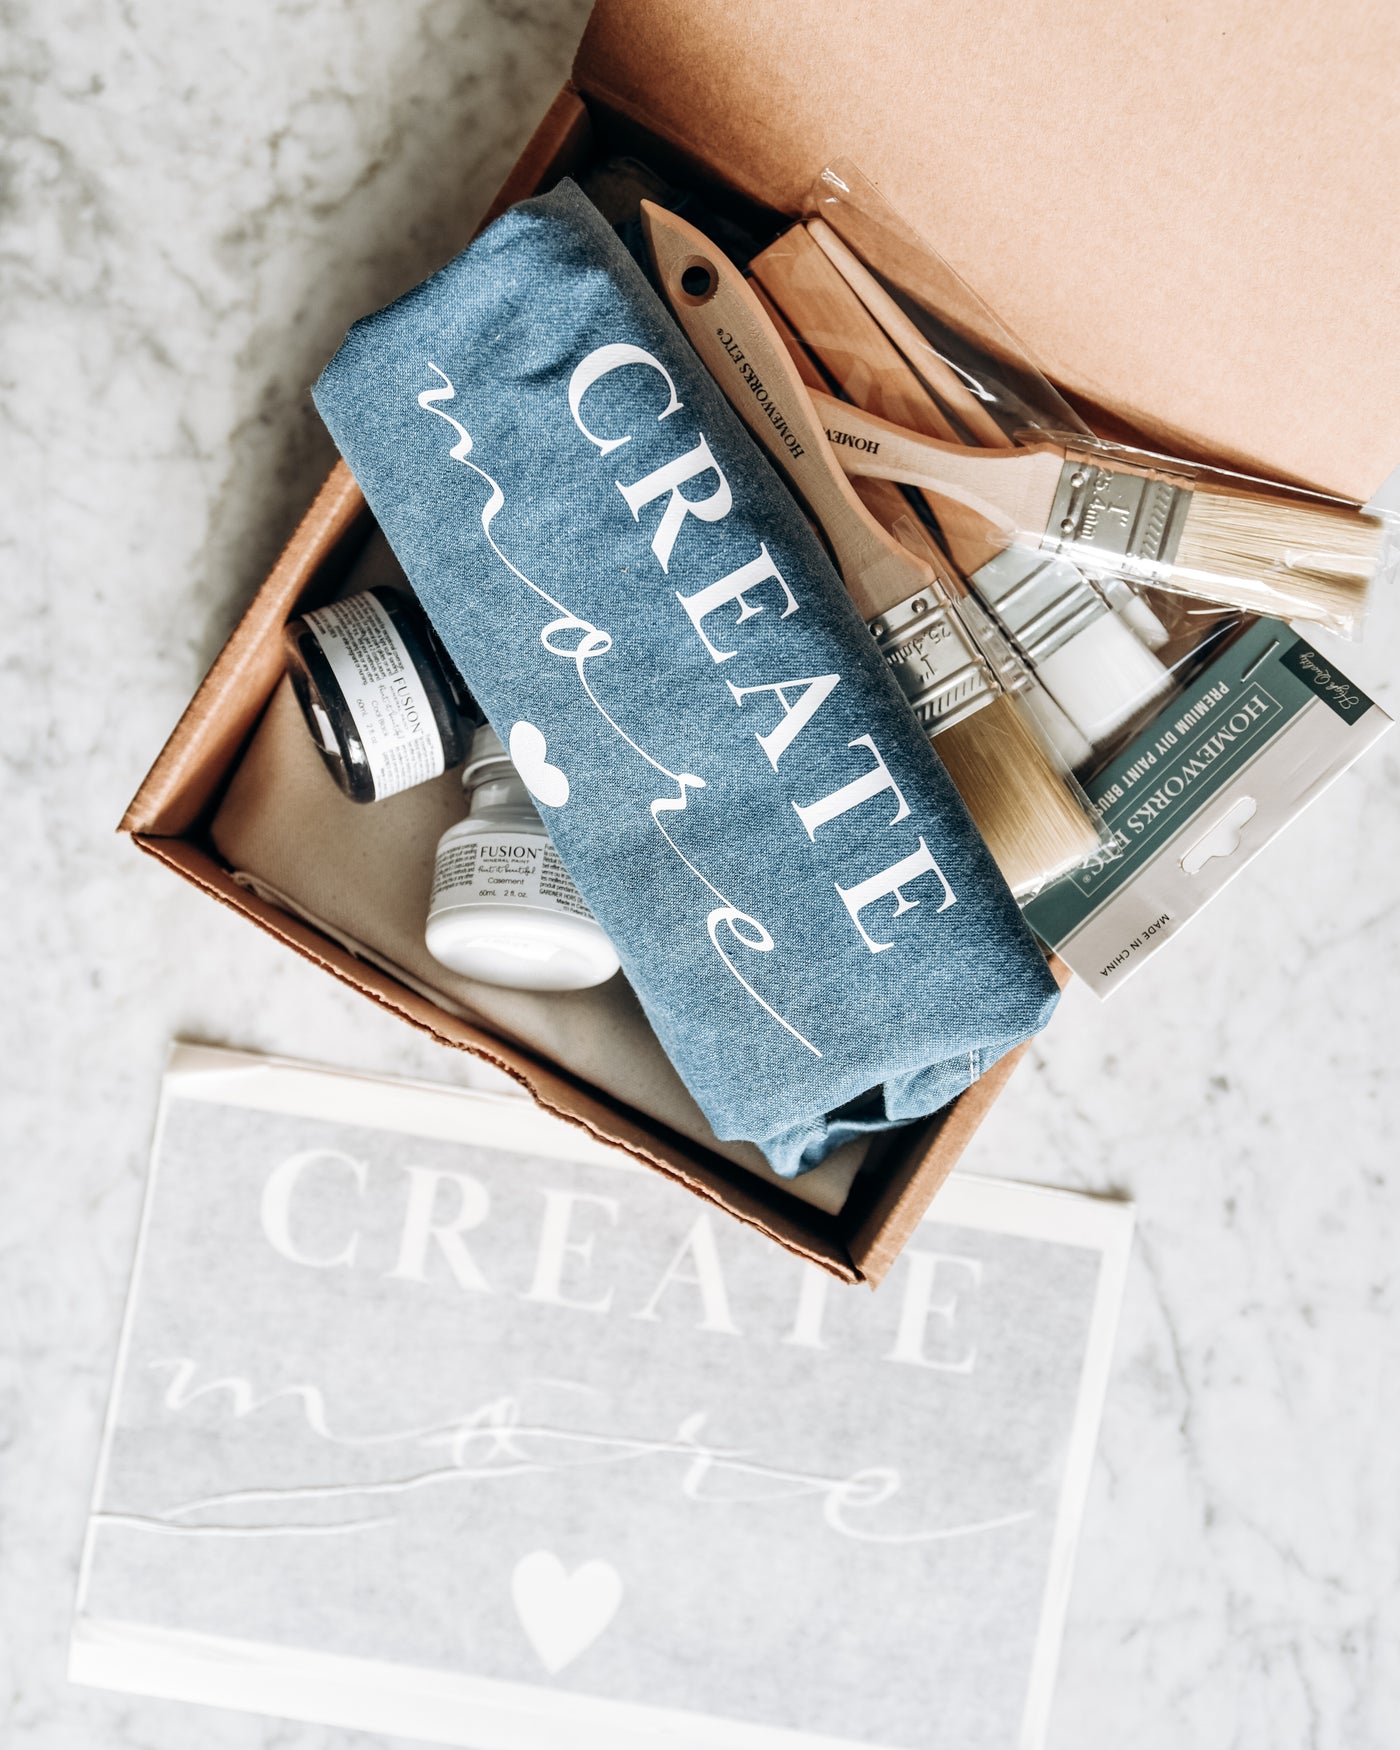 Introducing Our Create More Collection!